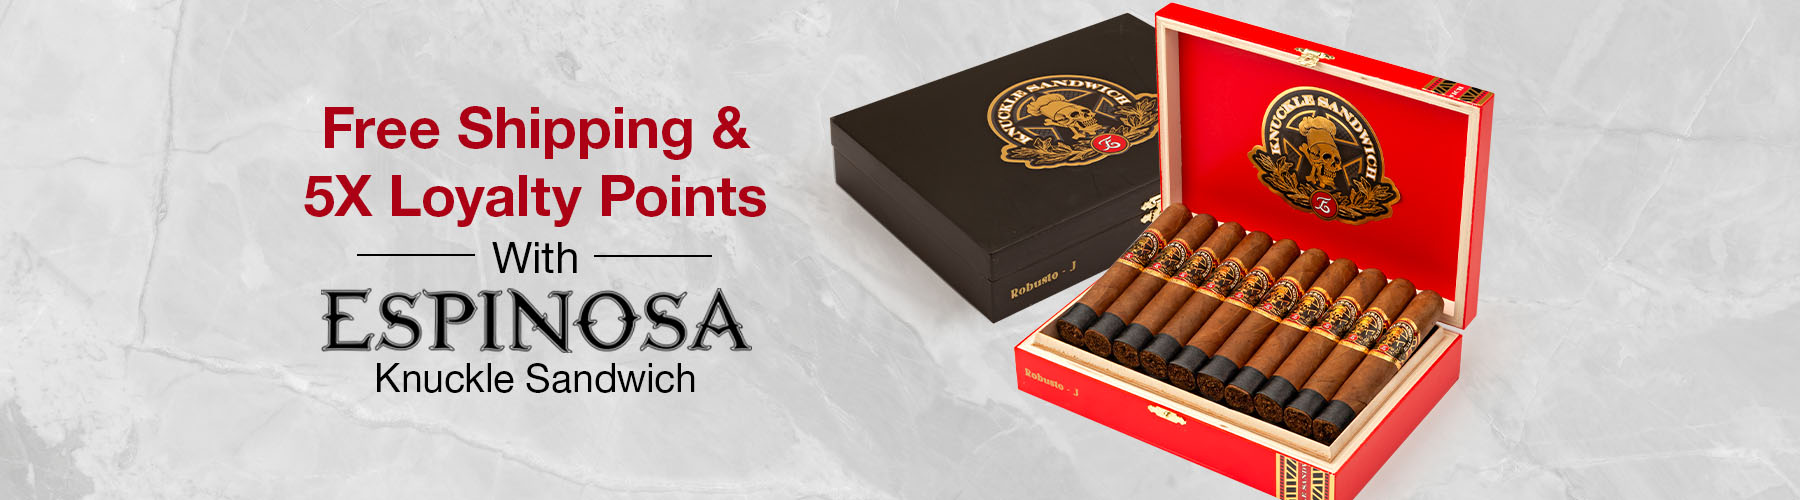 Free Shipping & 5X Loyalty Points with Espinosa Knuckle Sandwich!